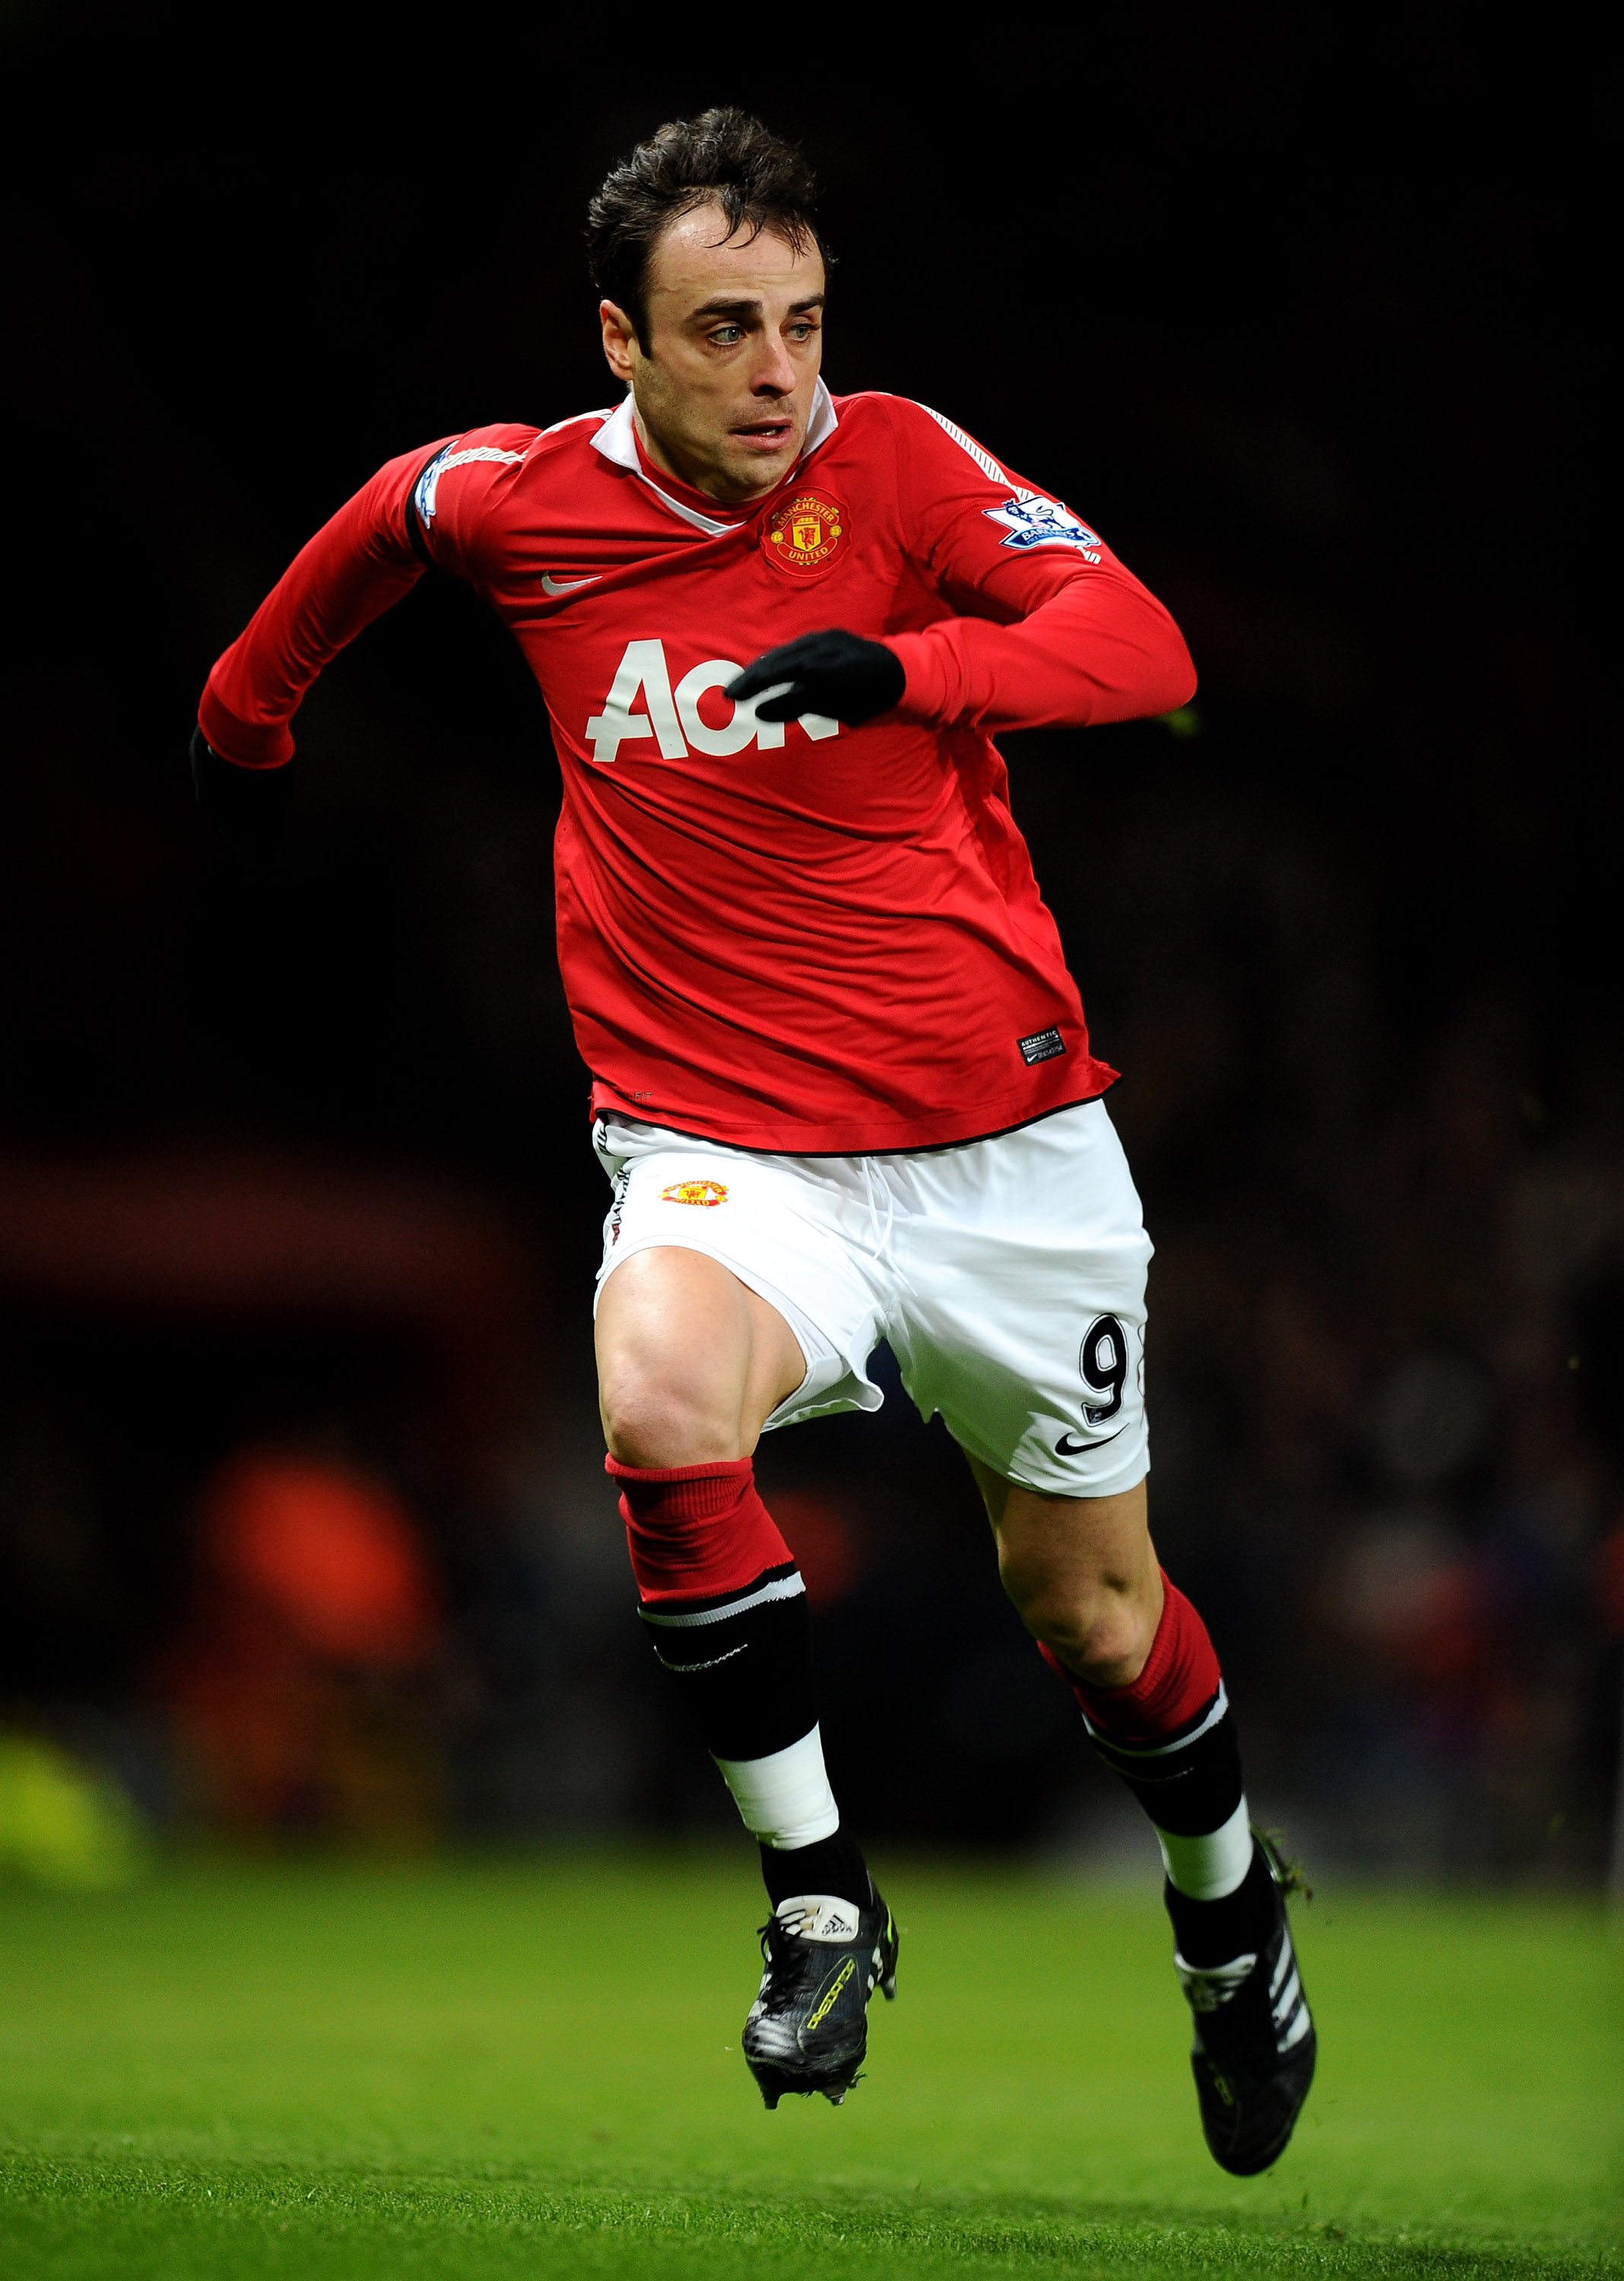 MANCHESTER, ENGLAND - FEBRUARY 01:  Dimitar Berbatov of Manchester United in action during the Barclays Premier League match between Manchester United and Aston Villa at Old Trafford on February 1, 2011 in Manchester, England. (Photo by Clive Brunskill/Ge